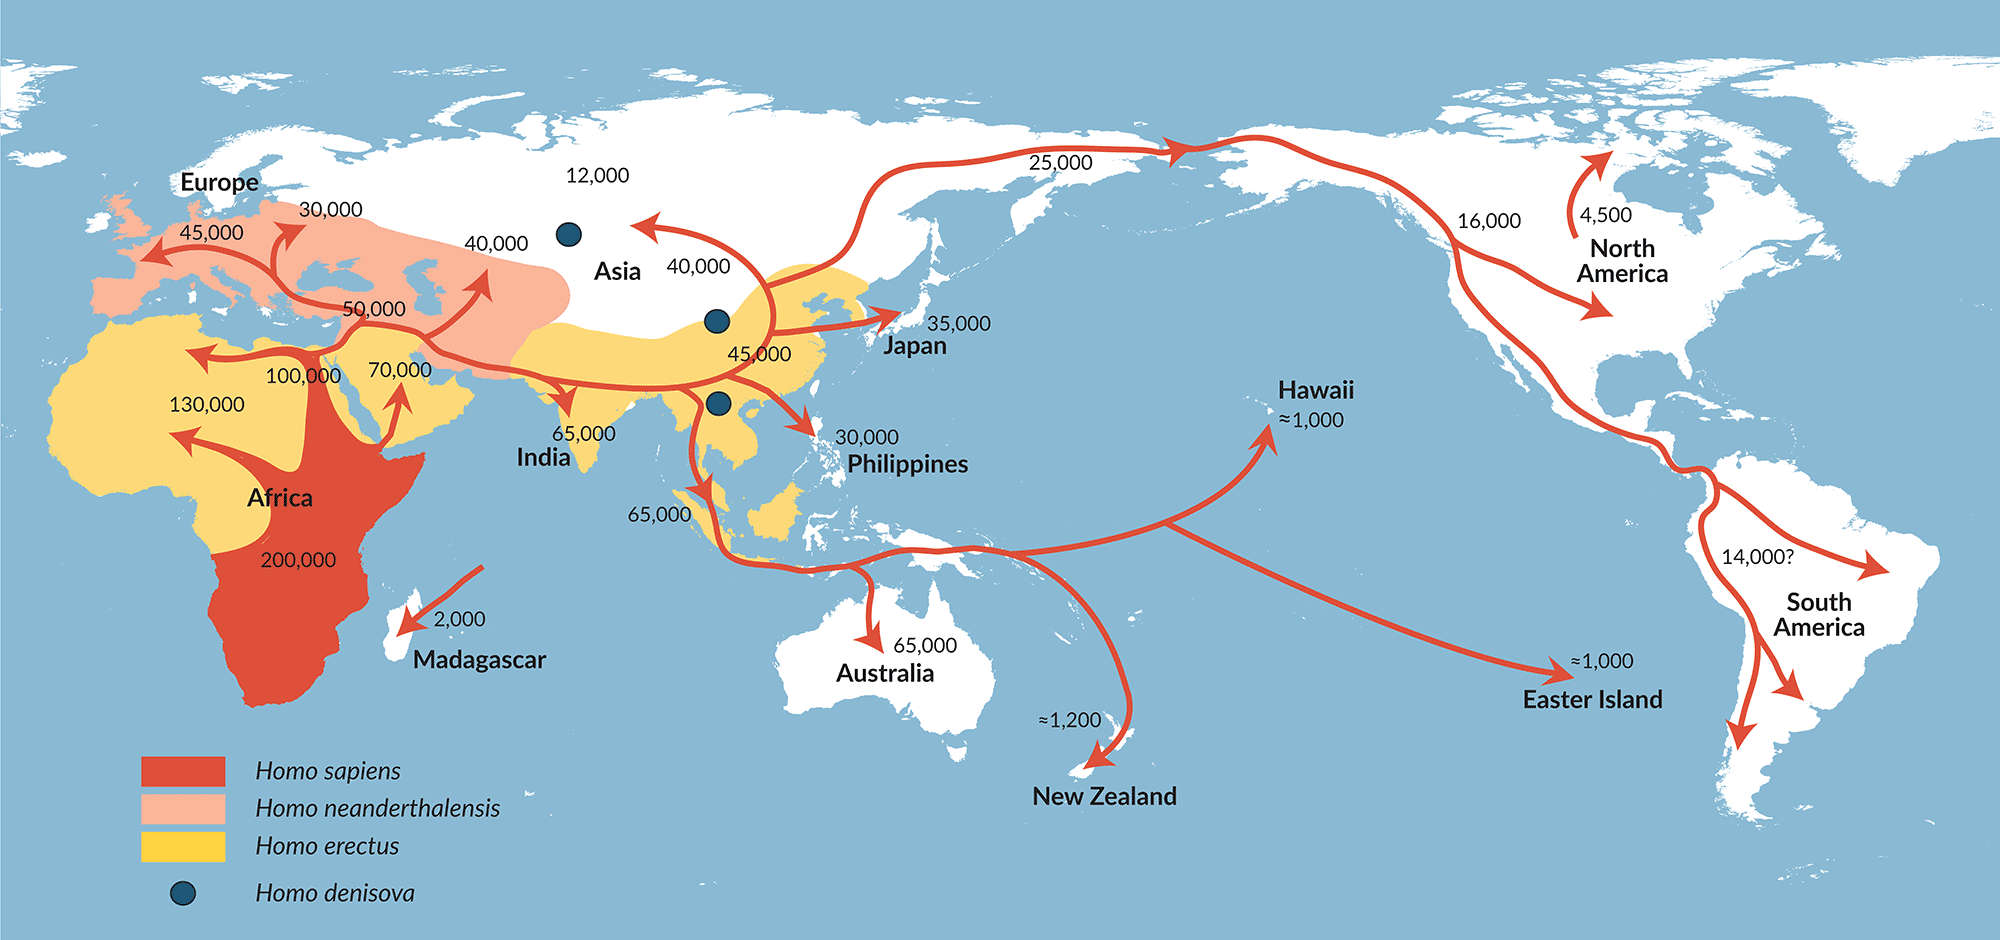 Estimations of the times at which Homo sapiens reached various areas of the world